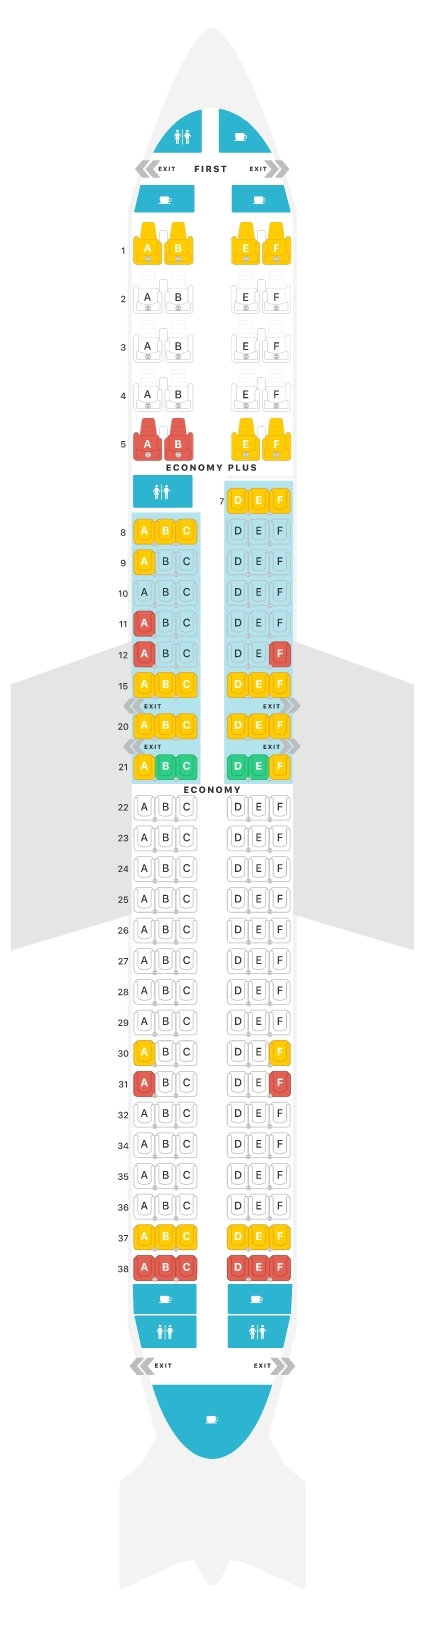 Boeing United 737 900 Seat Map